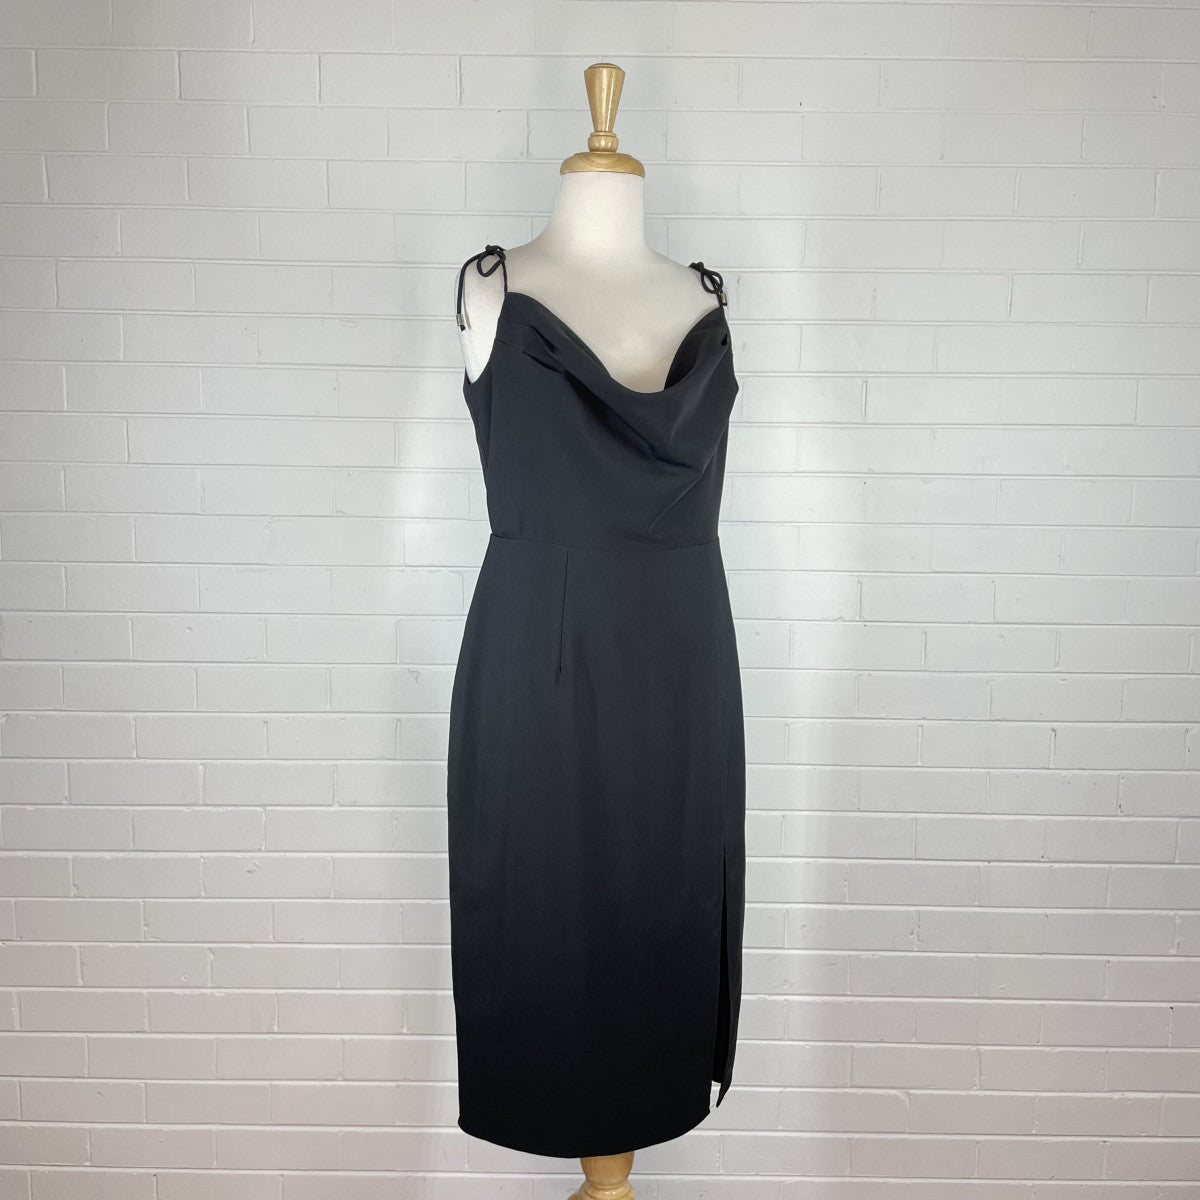 Chancery | dress | size 18 | midi length | new with tags